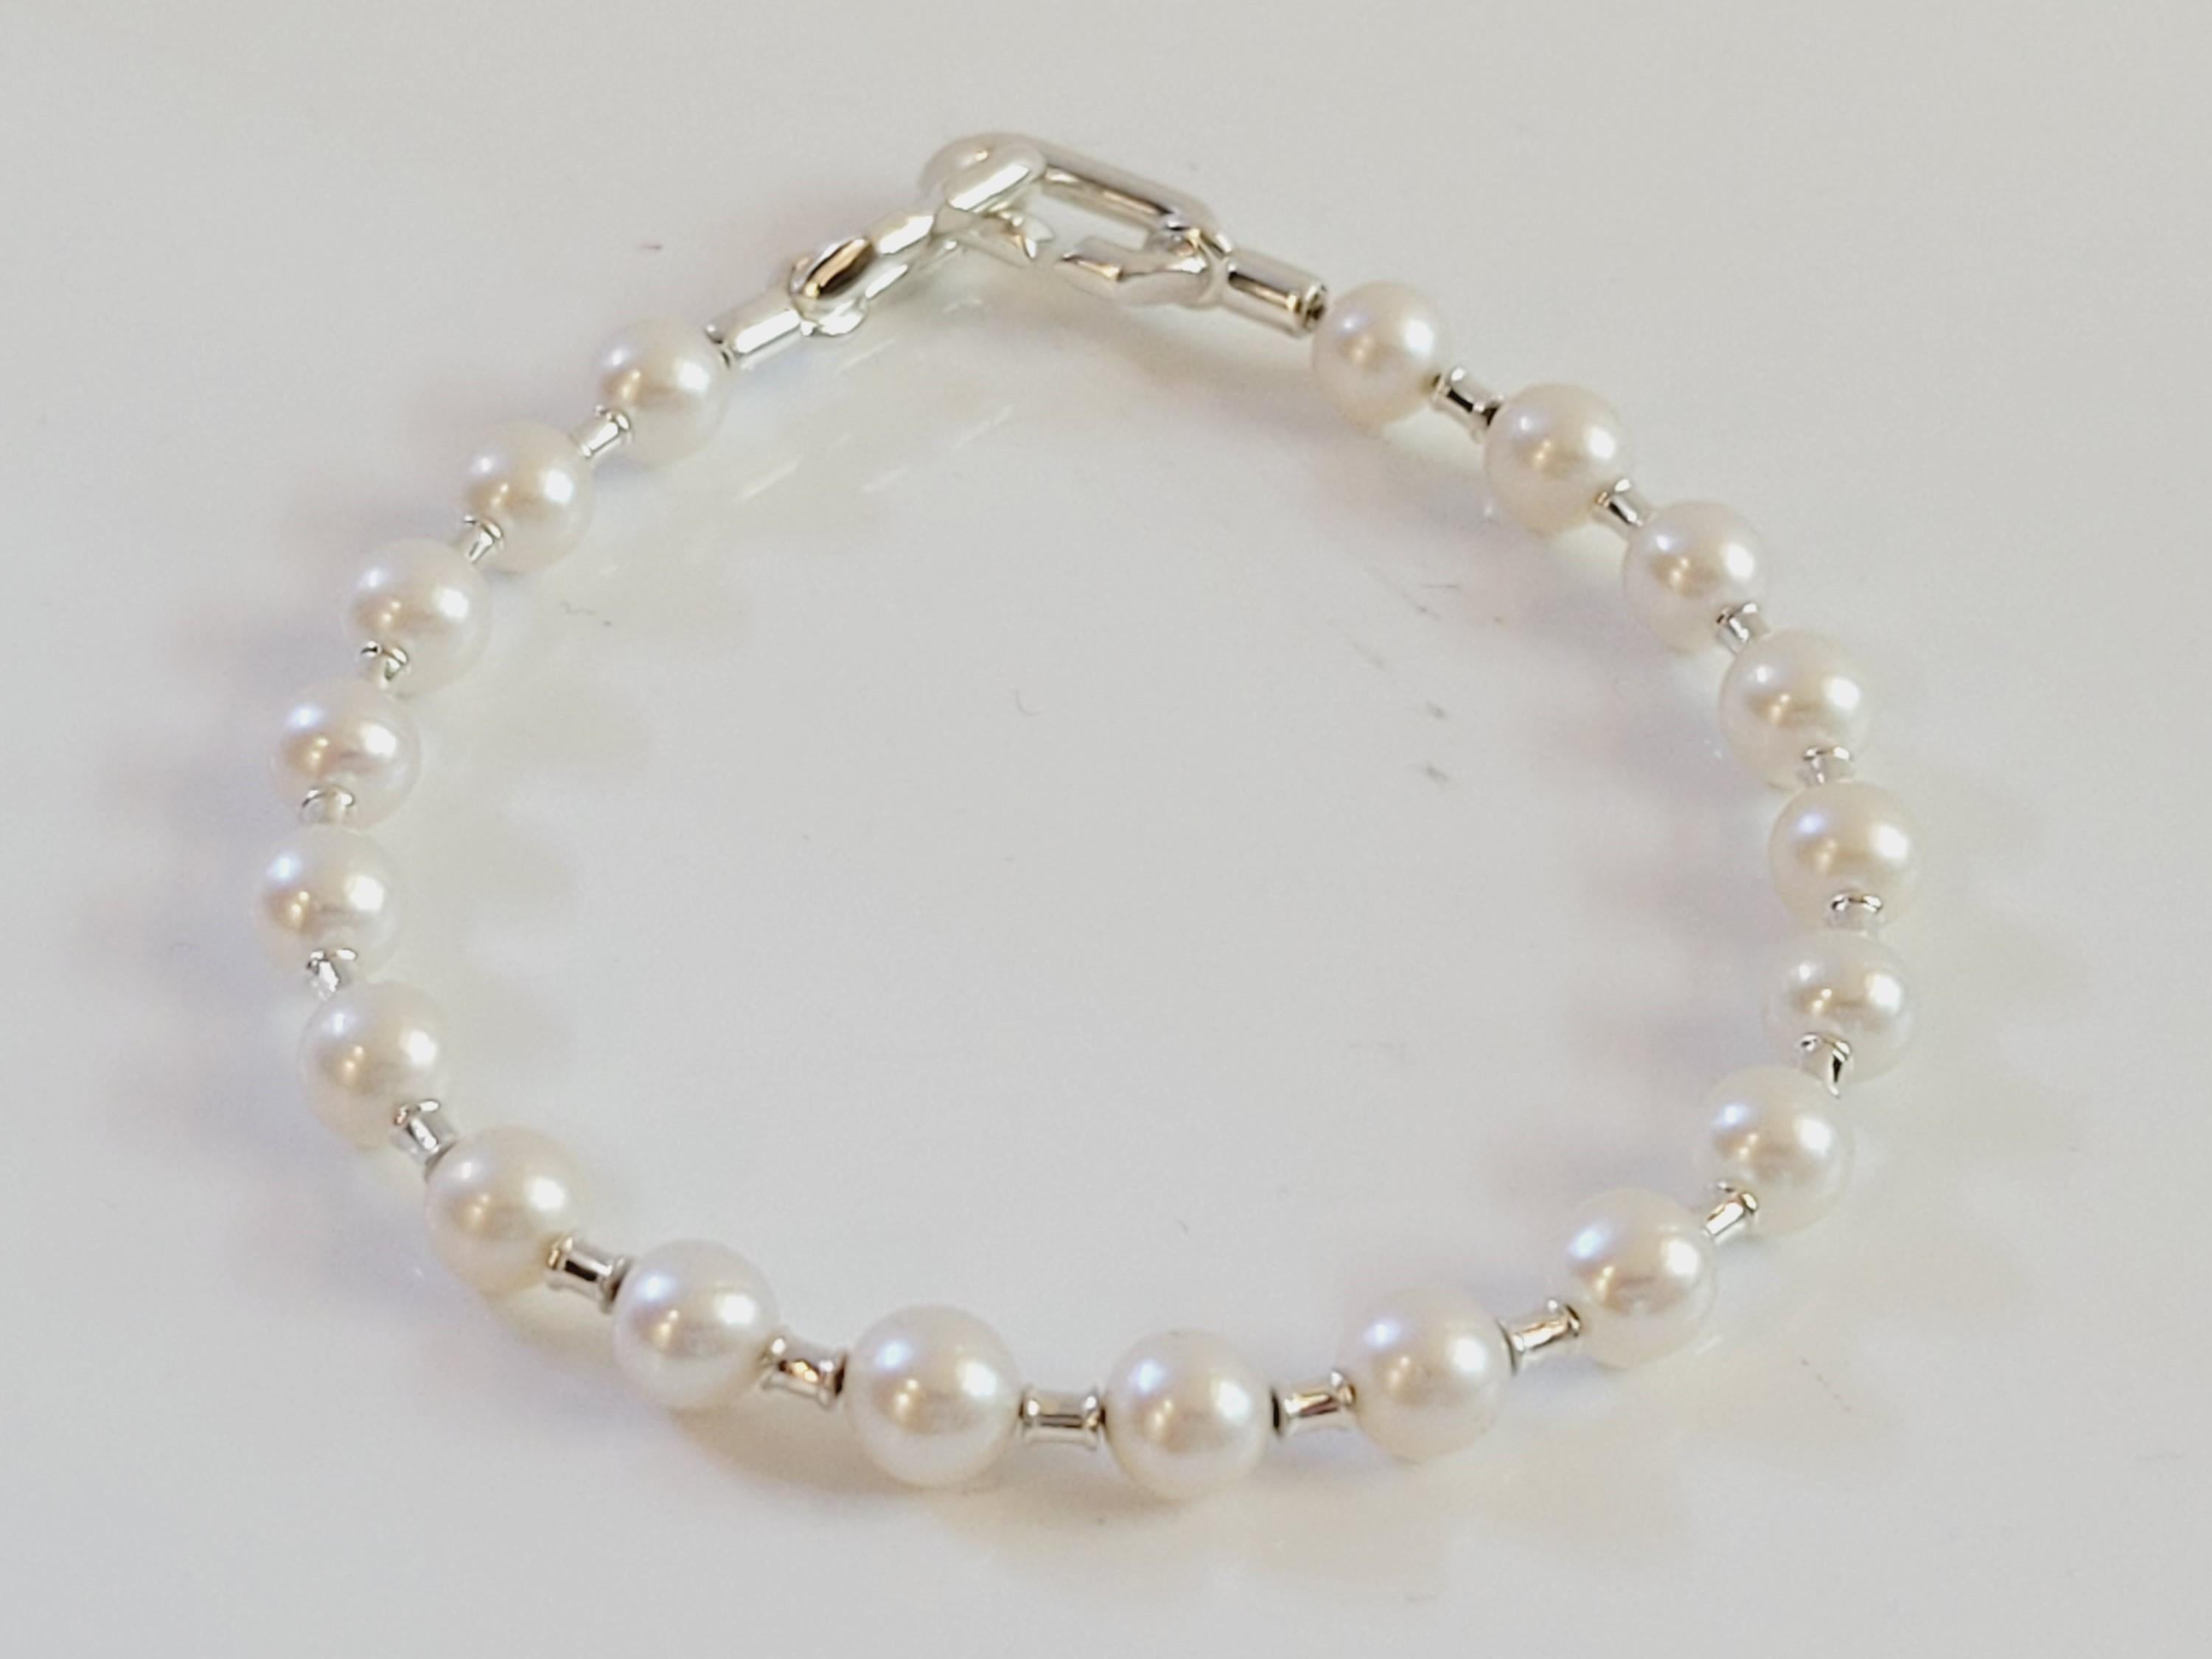 Sterling silver with freshwater cultured pearls
Brand Tiffany & co
Type Bracelet
Size Medium
Length 7.5